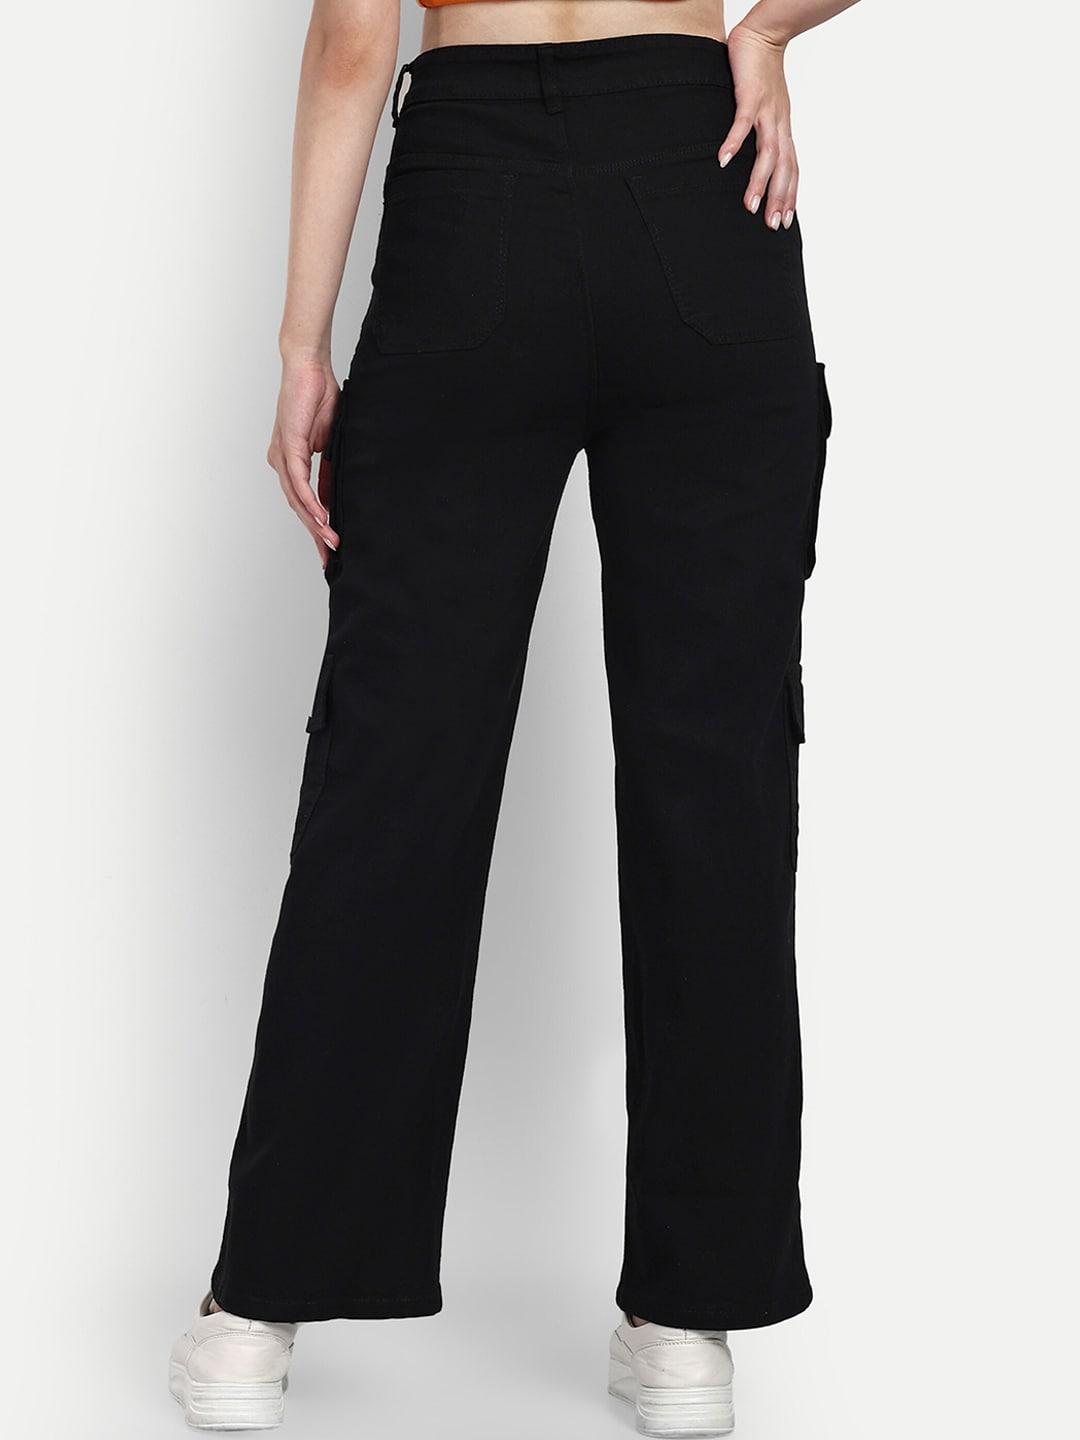 next-one-women-smart-wide-leg-high-rise-clean-look-stretchable-jeans